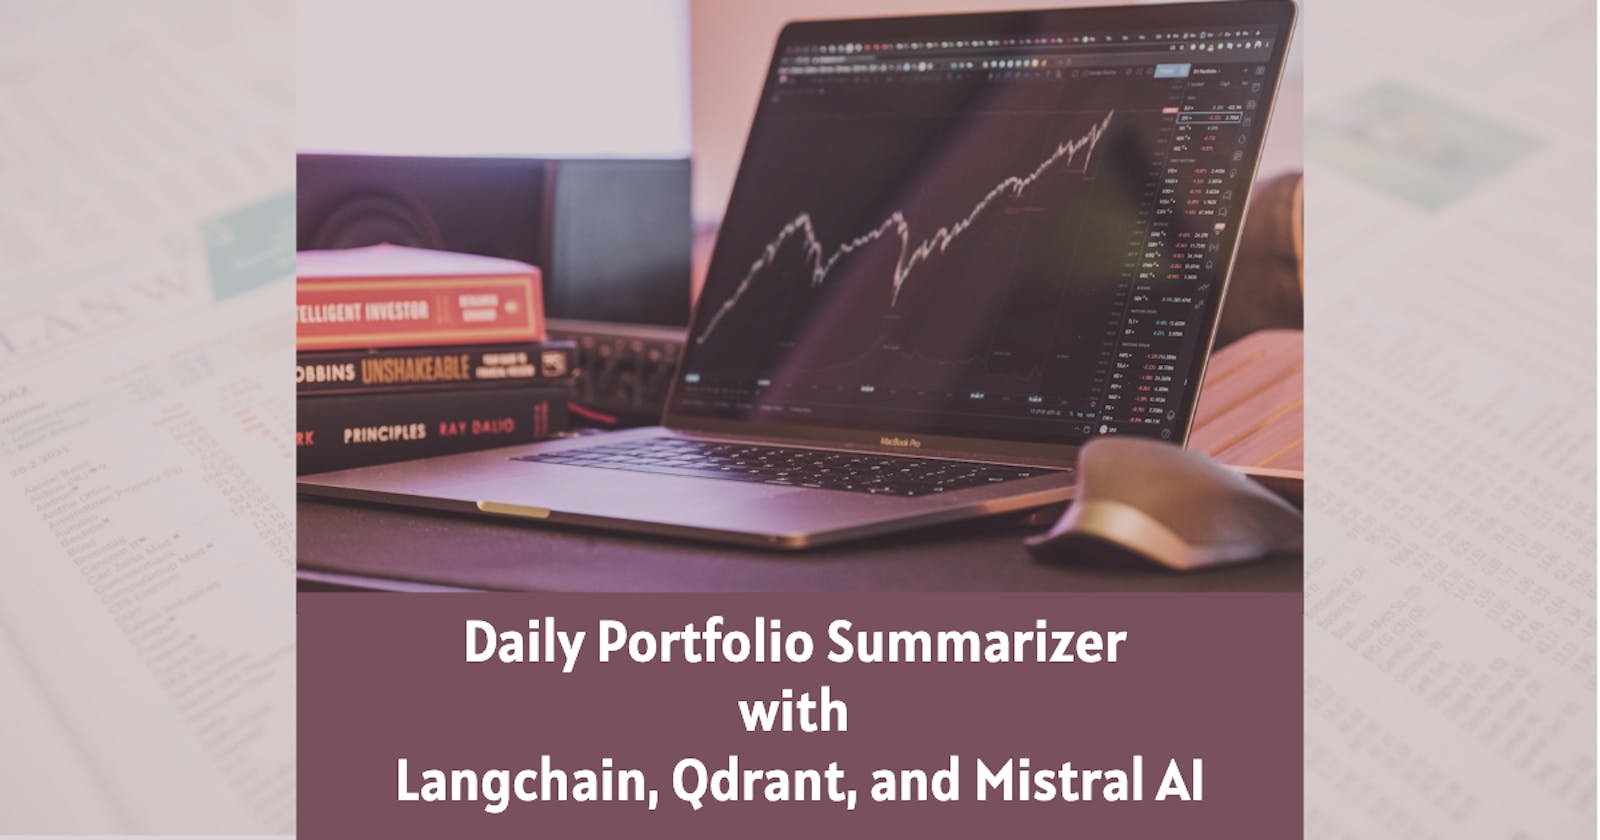 Daily Portfolio Summarizer with Langchain, Qdrant, and Mistral AI